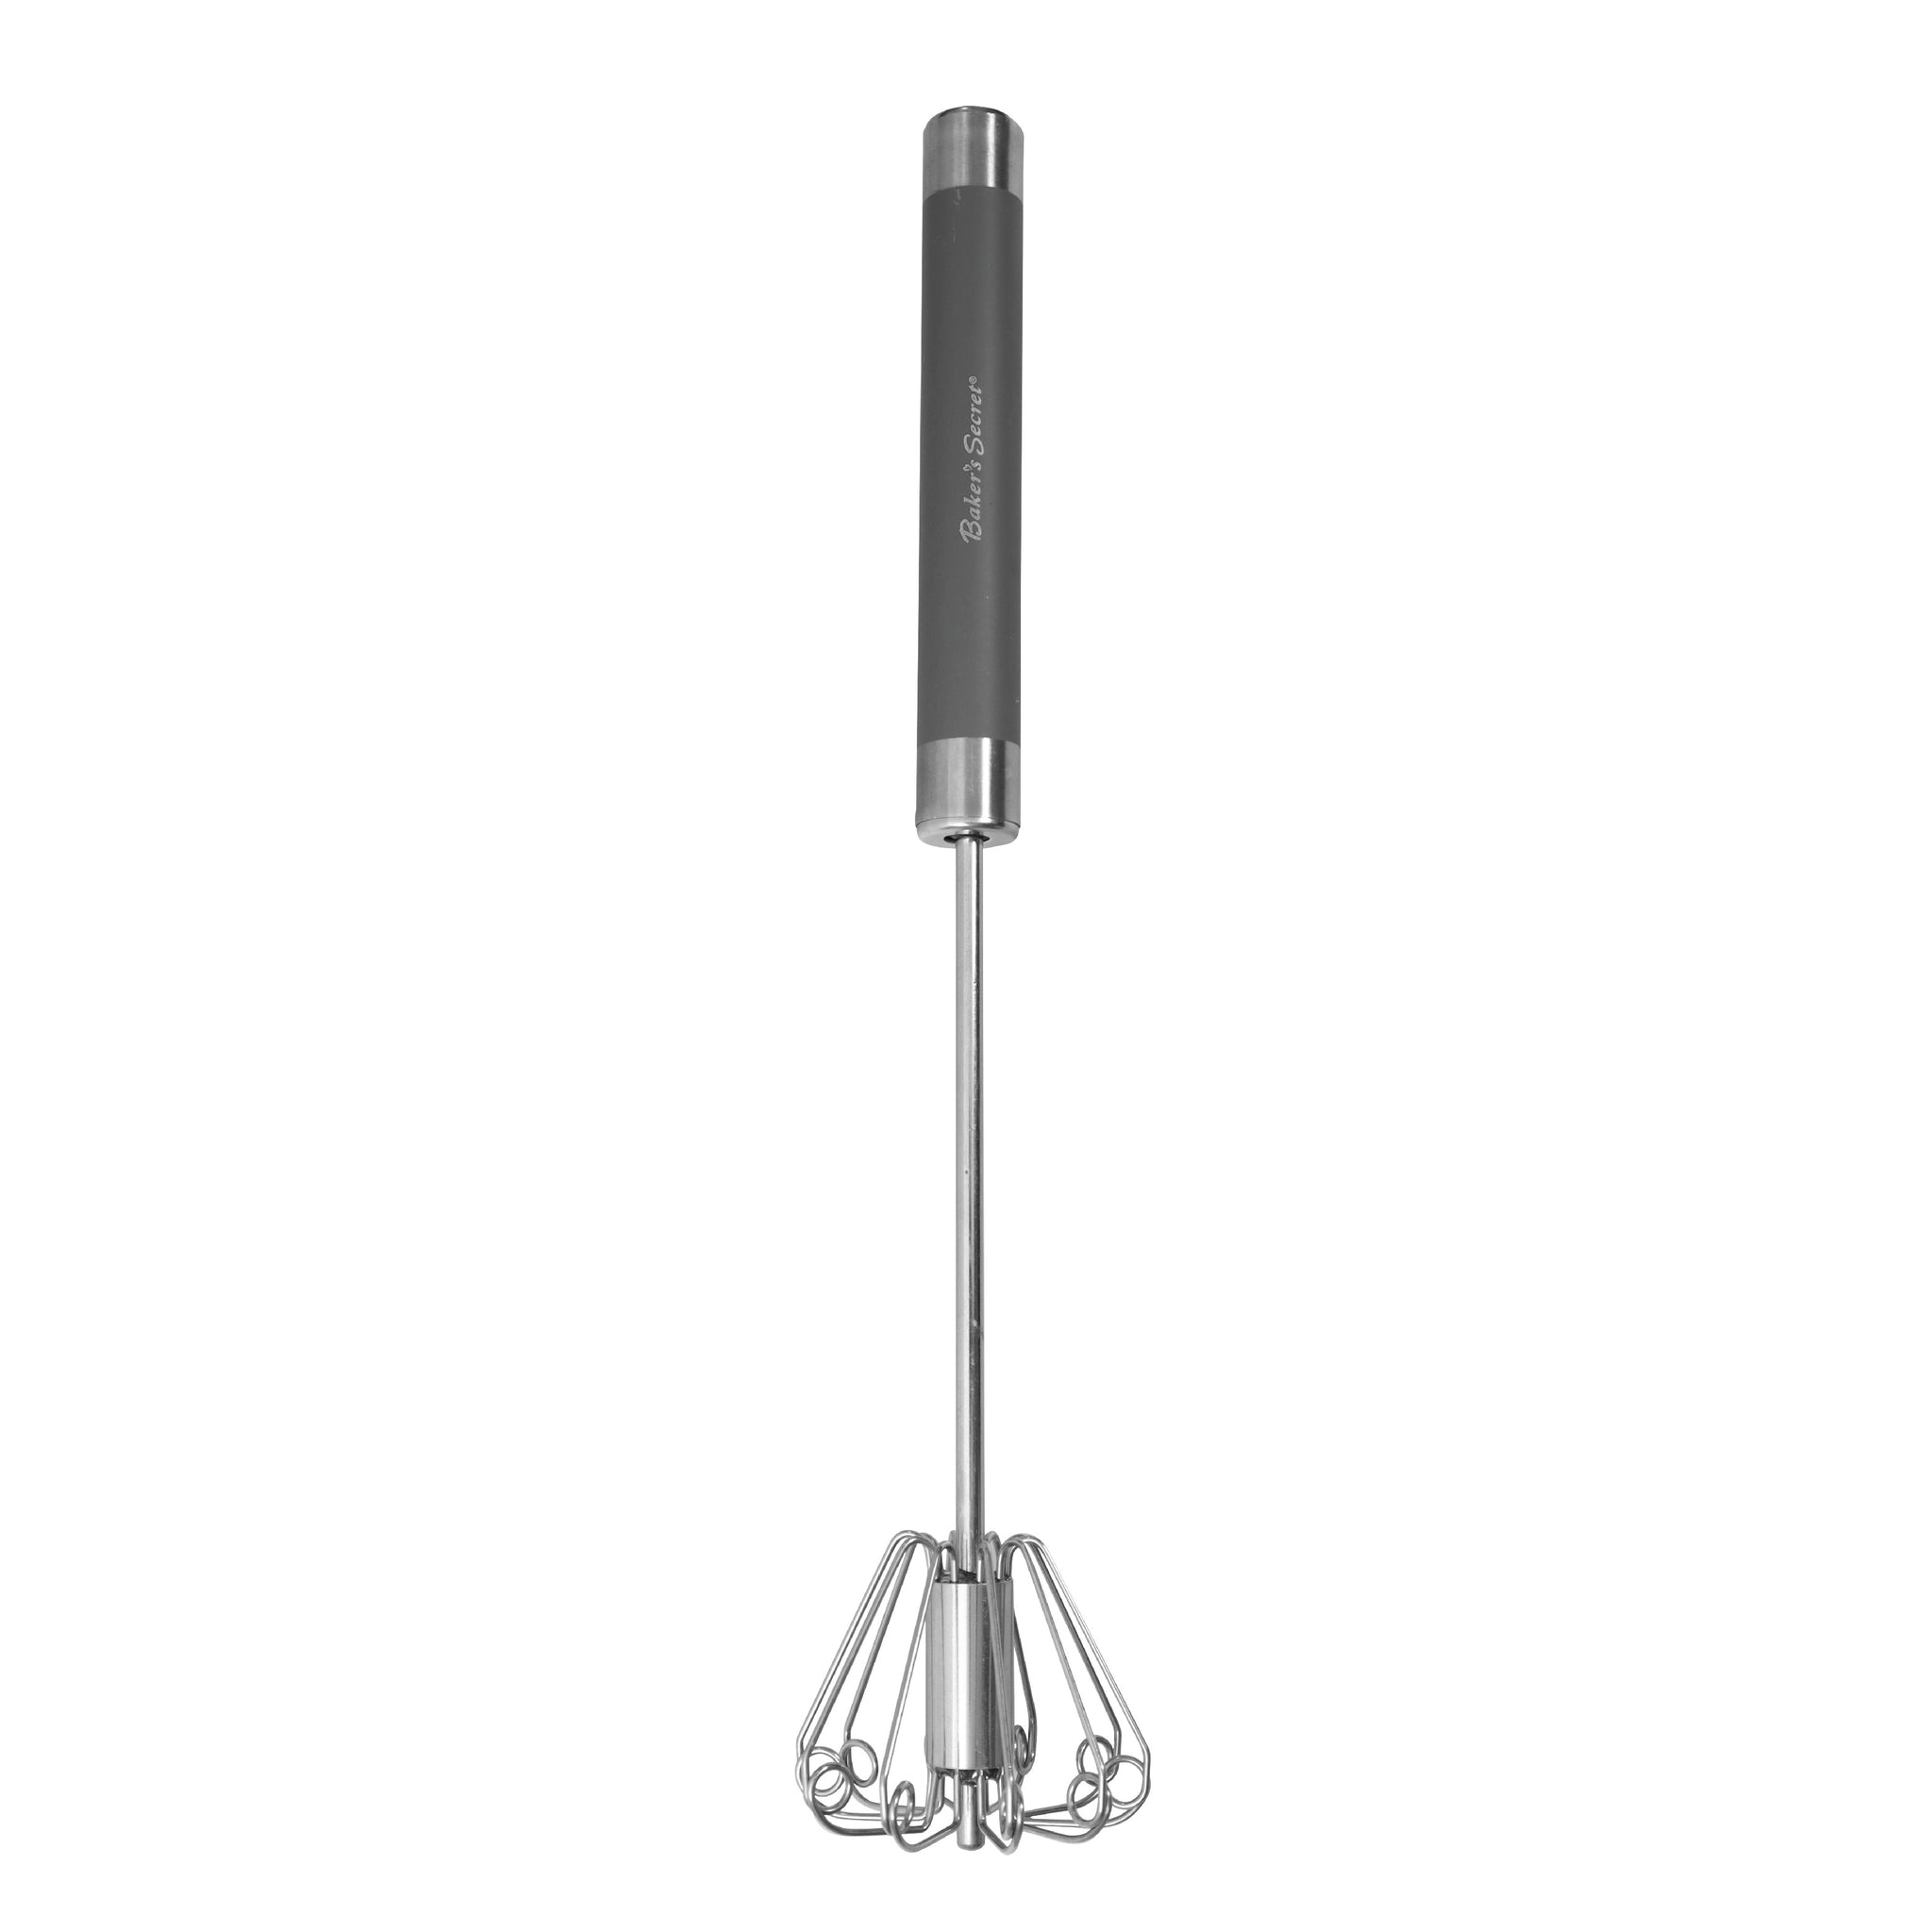 Stainless Steel Whisks 12" / Silver Cookware Accessories - Baker's Secret